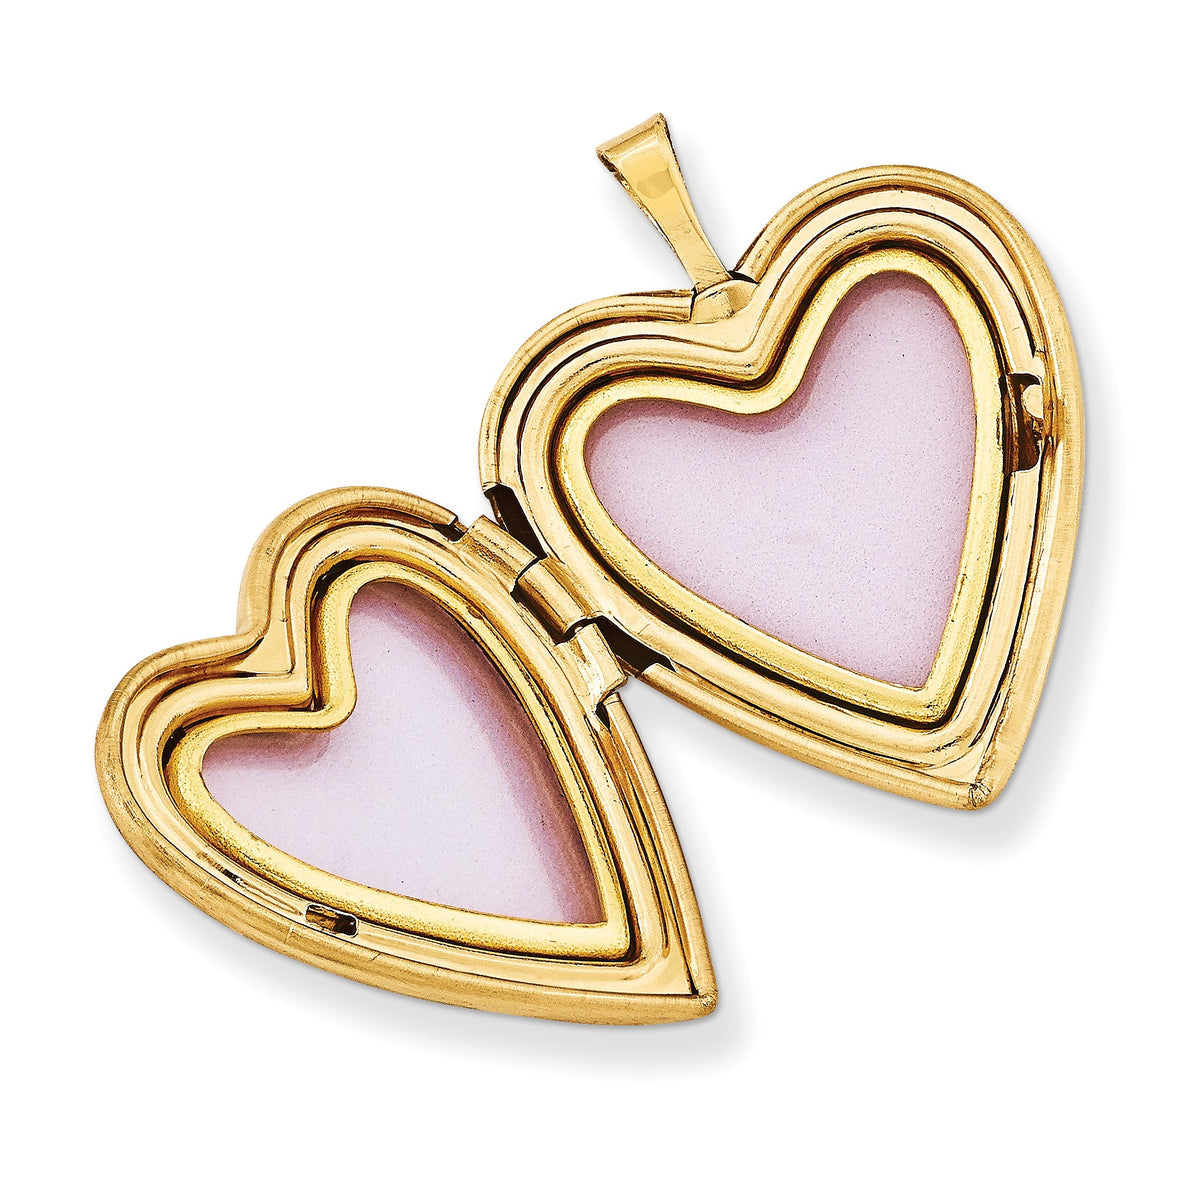 Alternate view of the 20mm Textured Swirl and Diamond Heart Locket in 14k Yellow Gold by The Black Bow Jewelry Co.